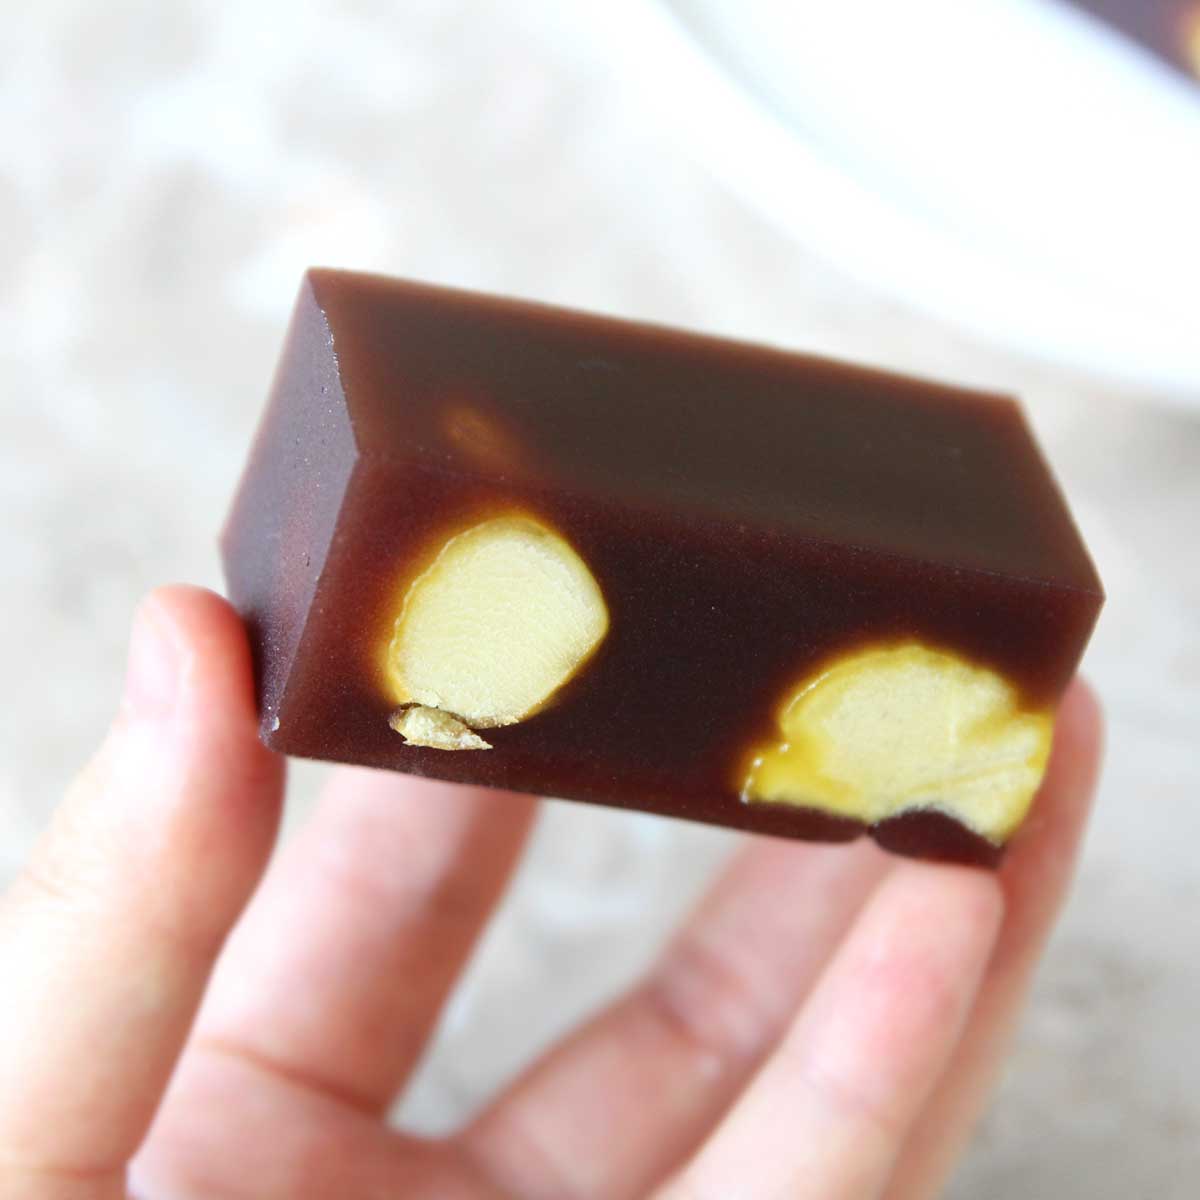 How to Make the Japanese Wagashi - Neri Yokan with Chestnuts - Coconut Milk Snow Skin Mooncakes